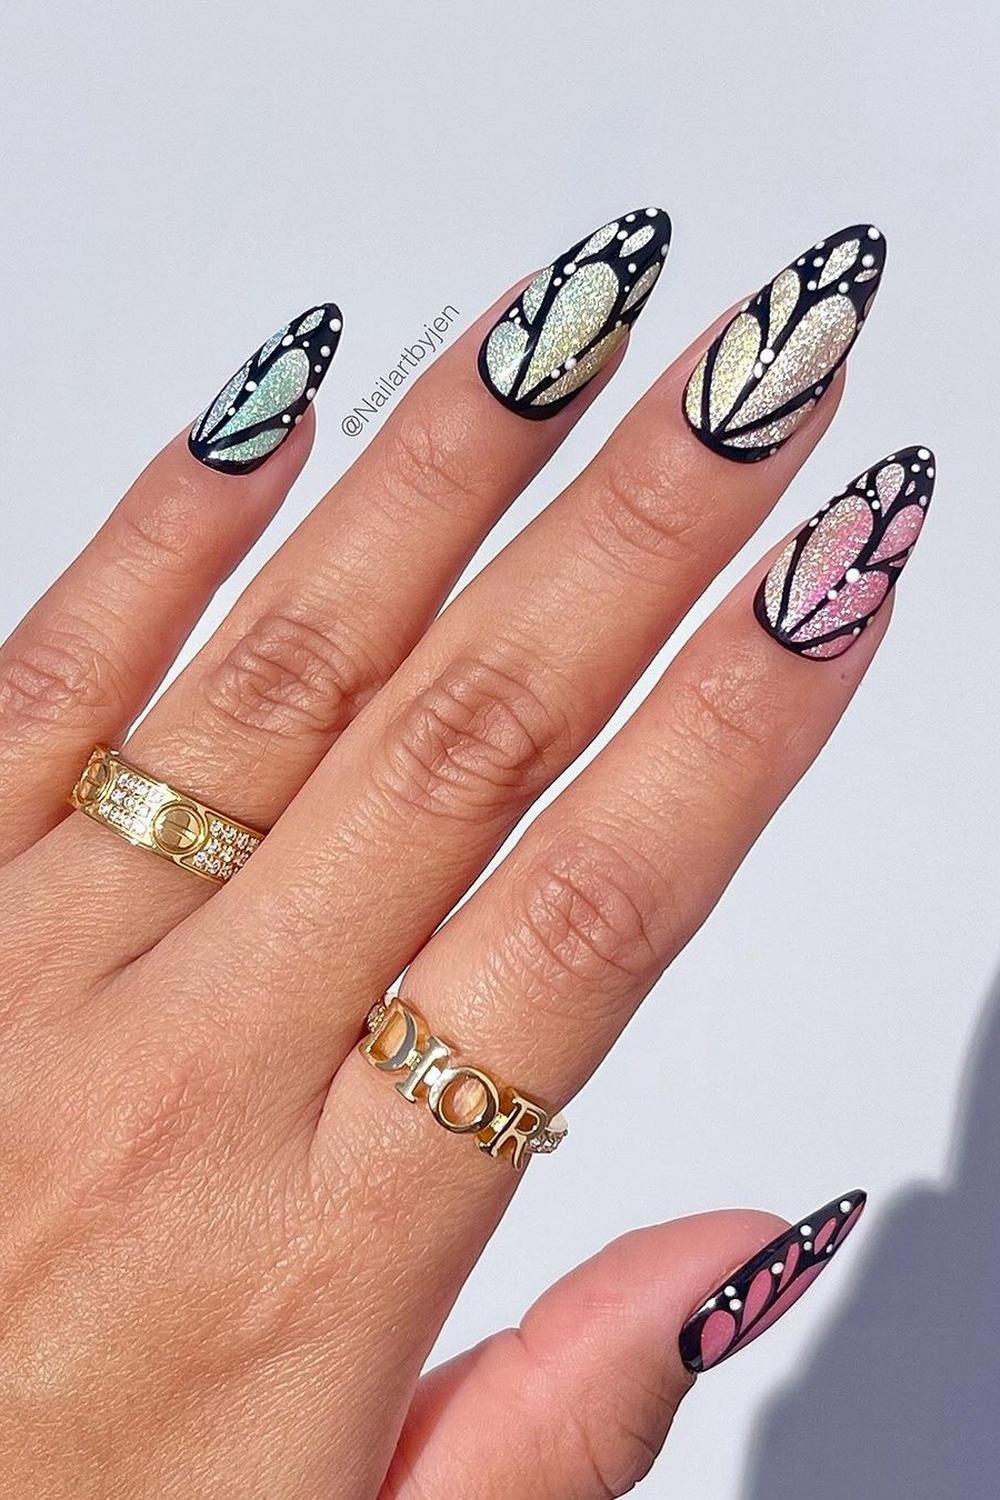 17 - Picture of Whimsical Nails